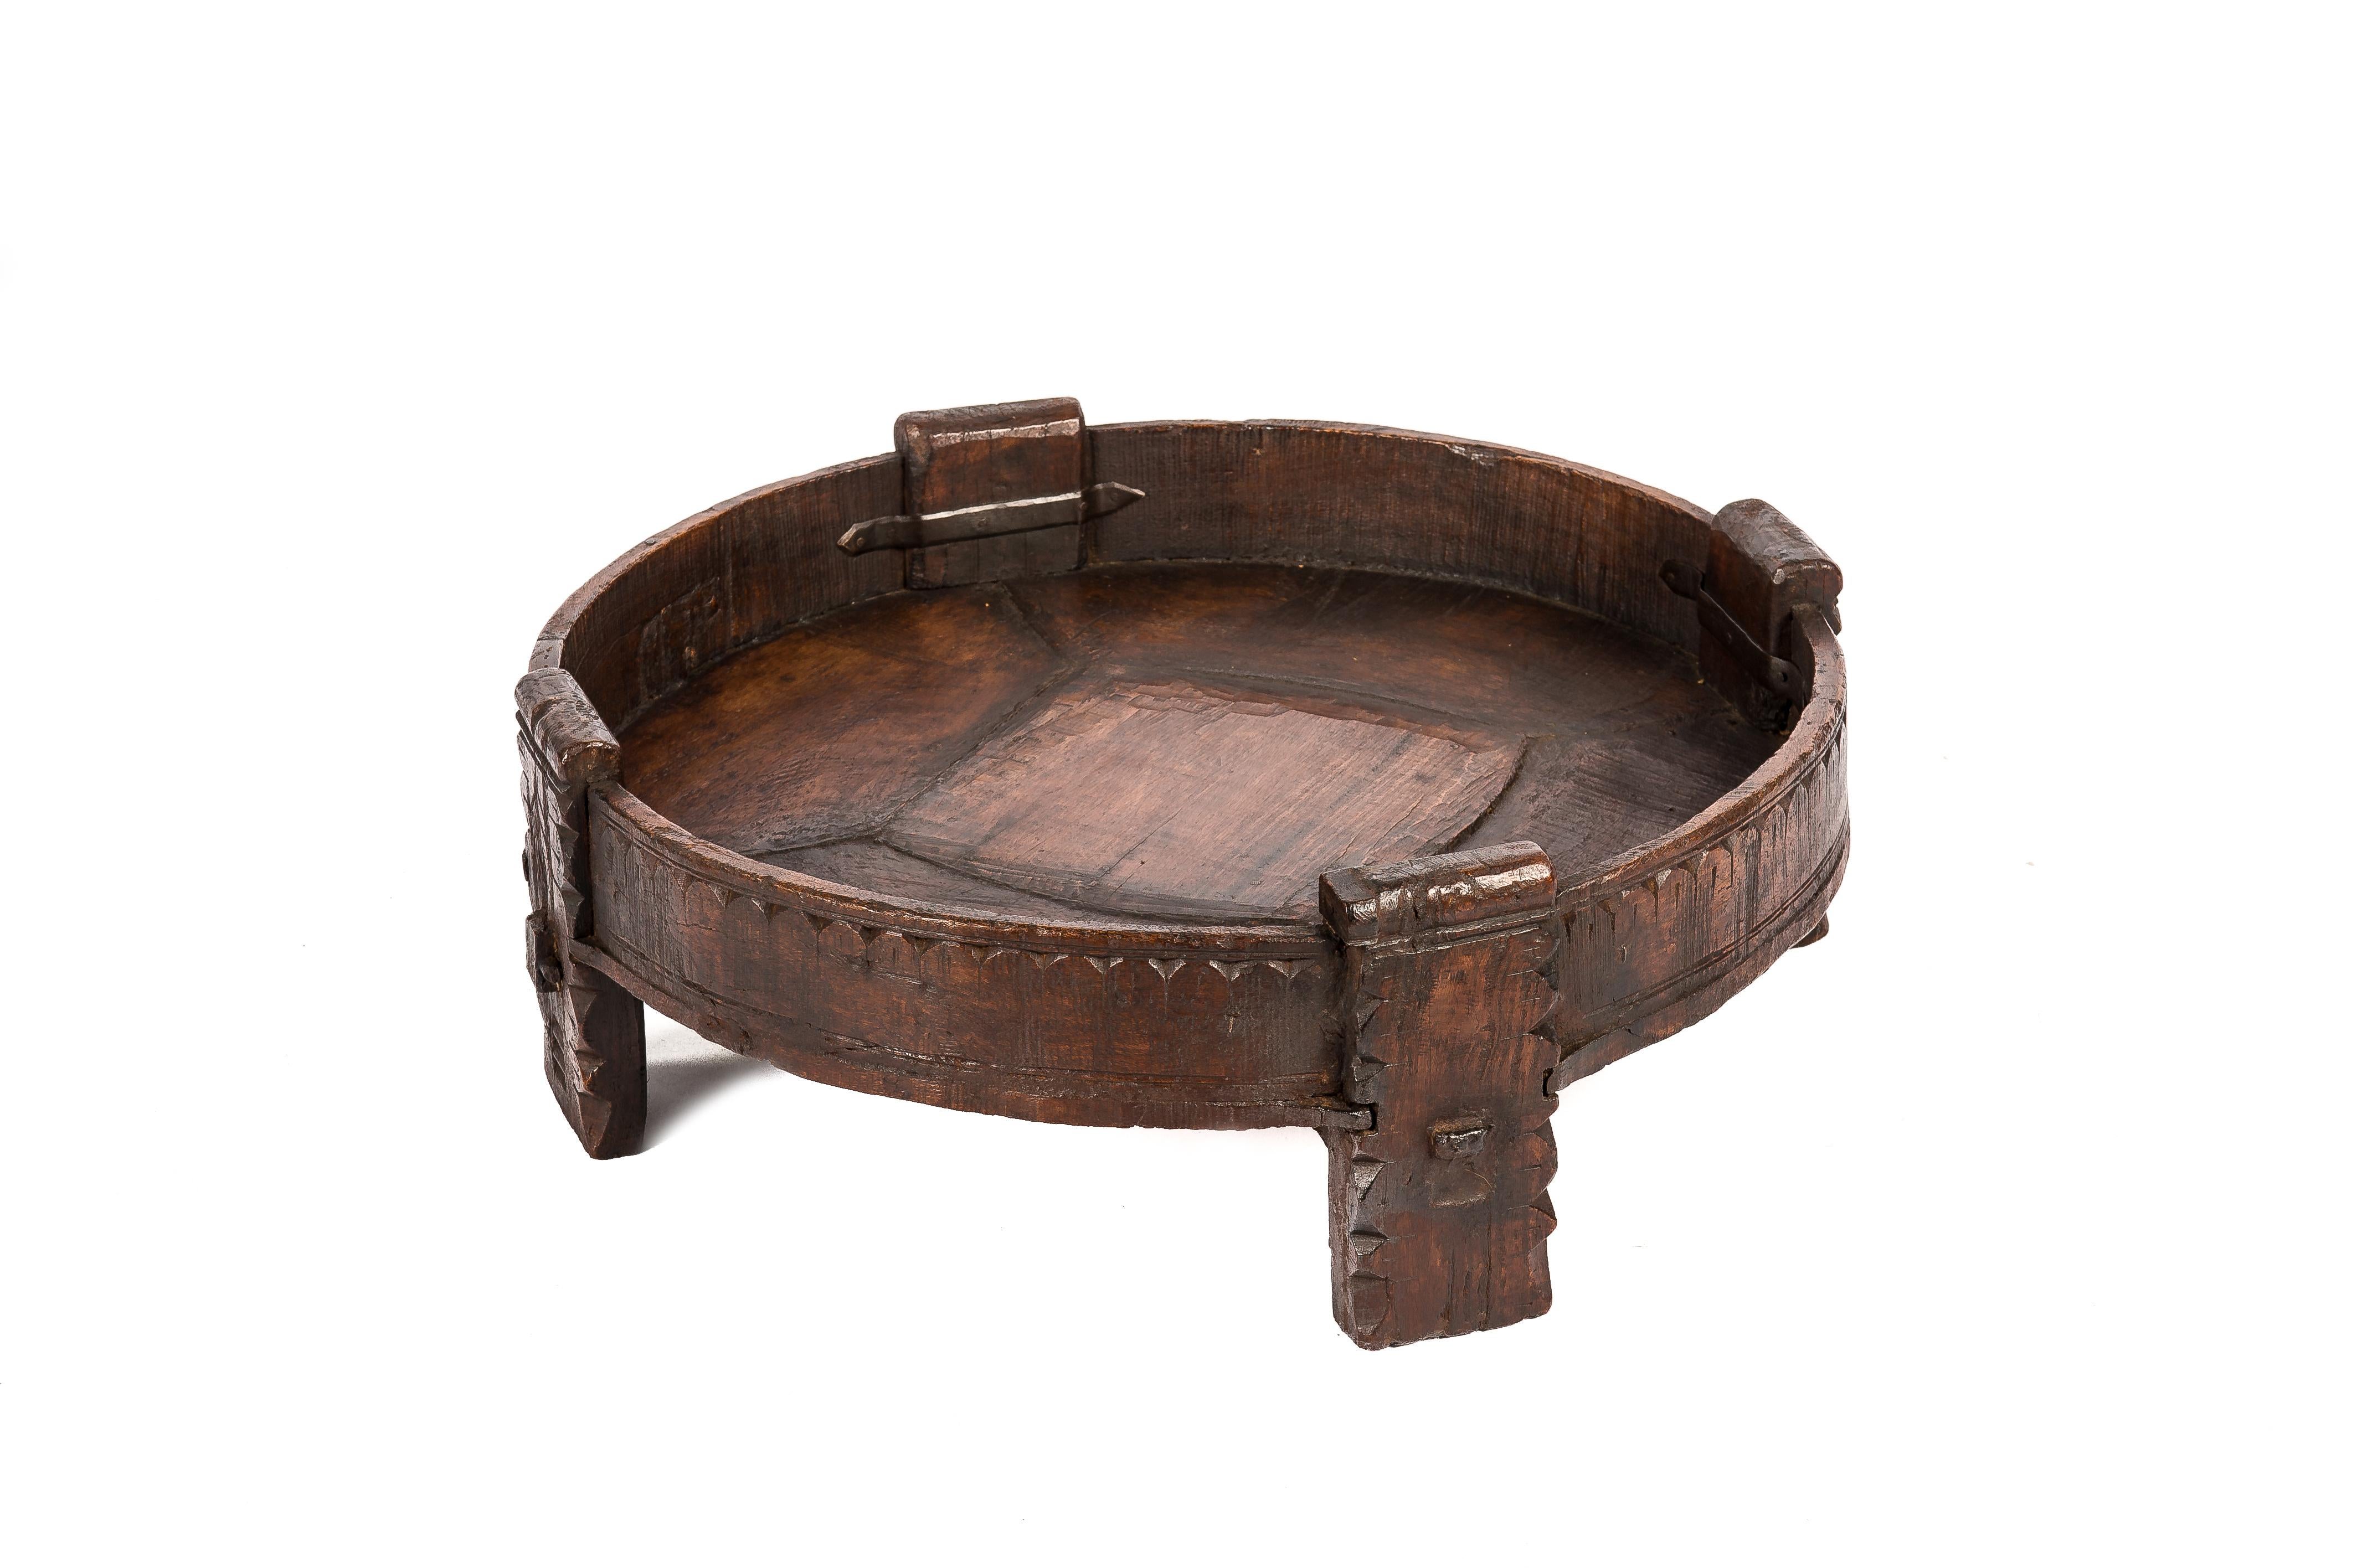 This beautiful hand-carved solid teak Grinder or Chakki table was made in India circa 1910. The table was richly decorated with hand-carved geometric details throughout the table. The piece is sturdy with reinforcing iron straps joining the legs to